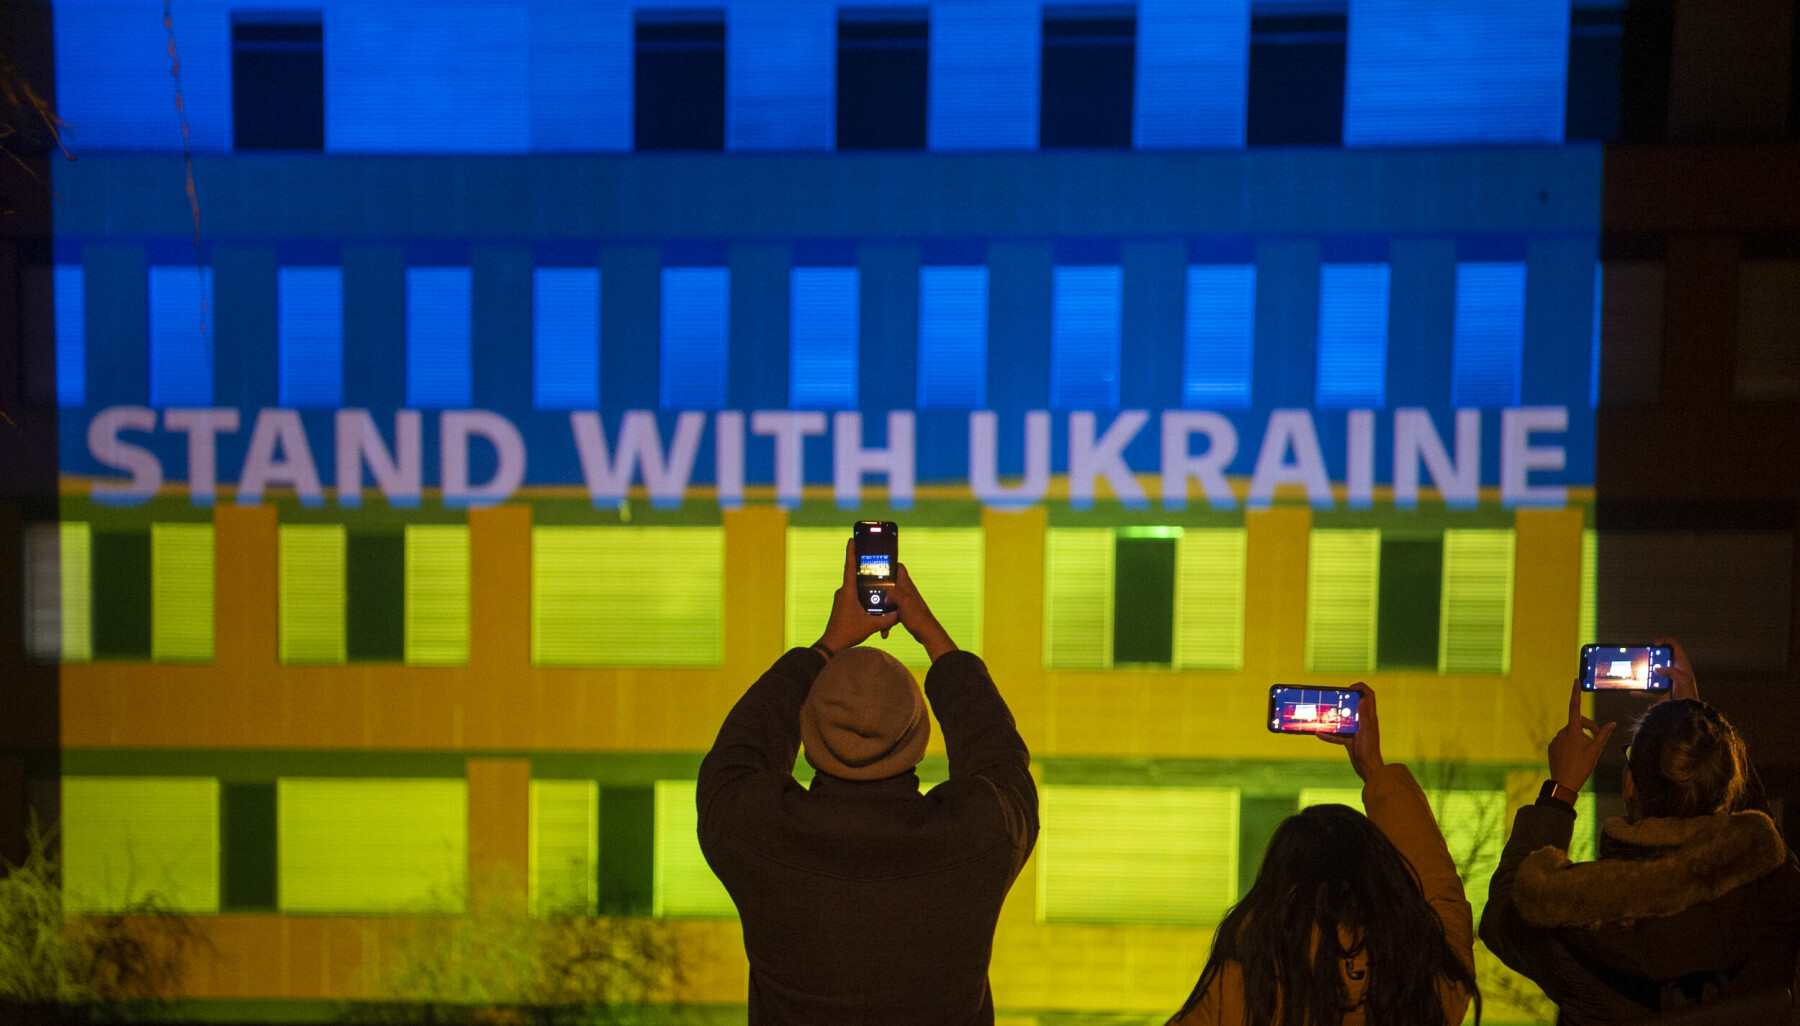 Inscription Stand with Ukraine illuminates on the building of the University of South Bohemia in Ceske Budejovice, Czech Republic, March 3, 2022. (CTK Photo/Vaclav Pancer)